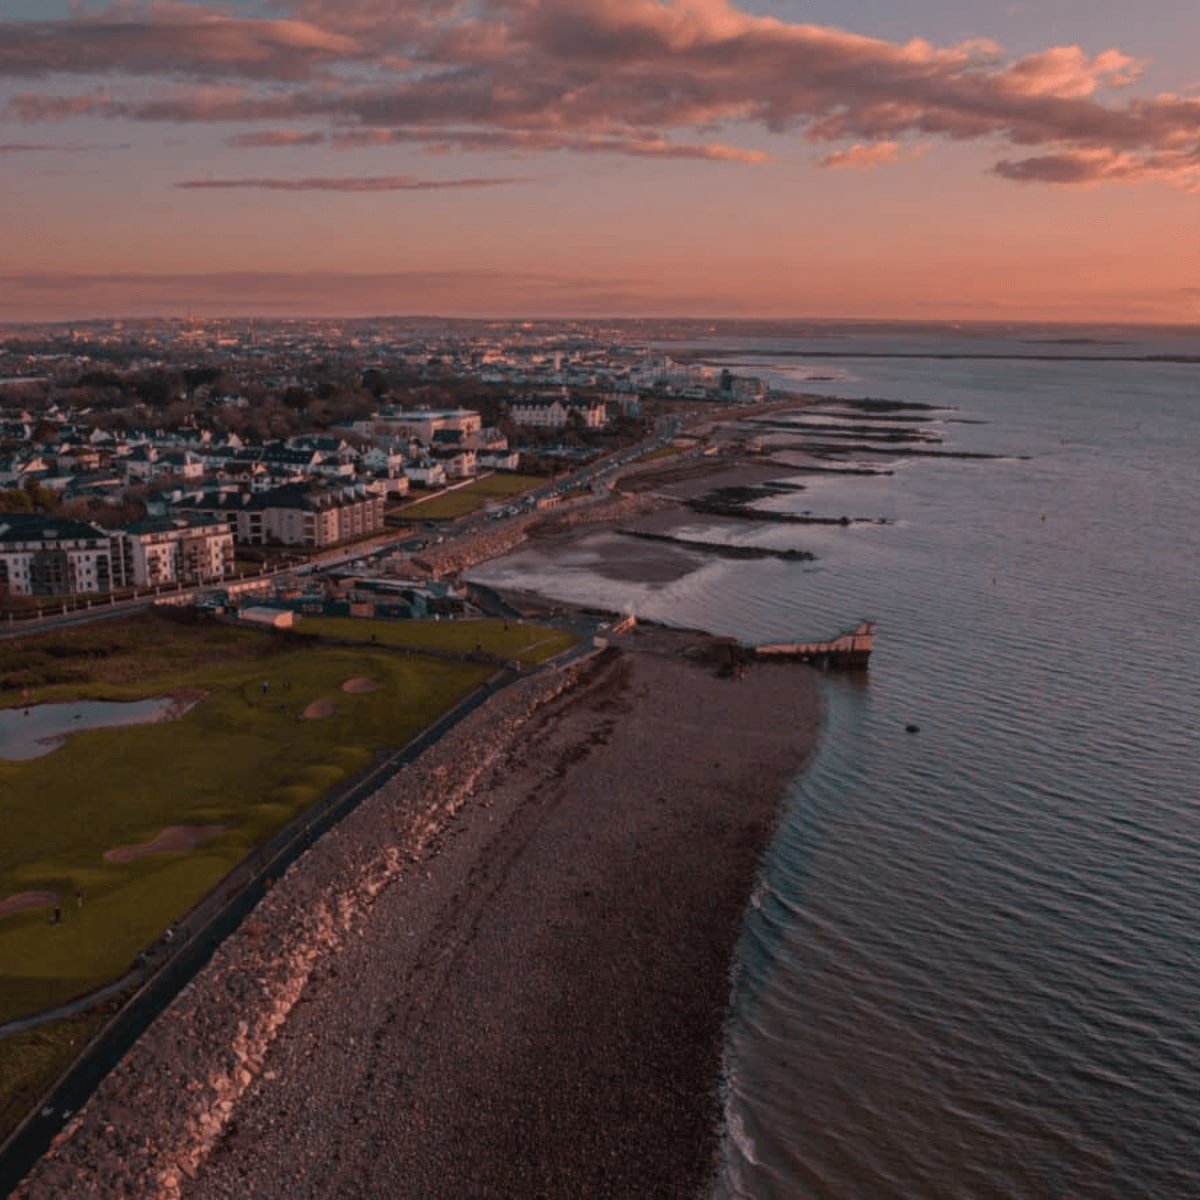 An aerial view of salthill coast